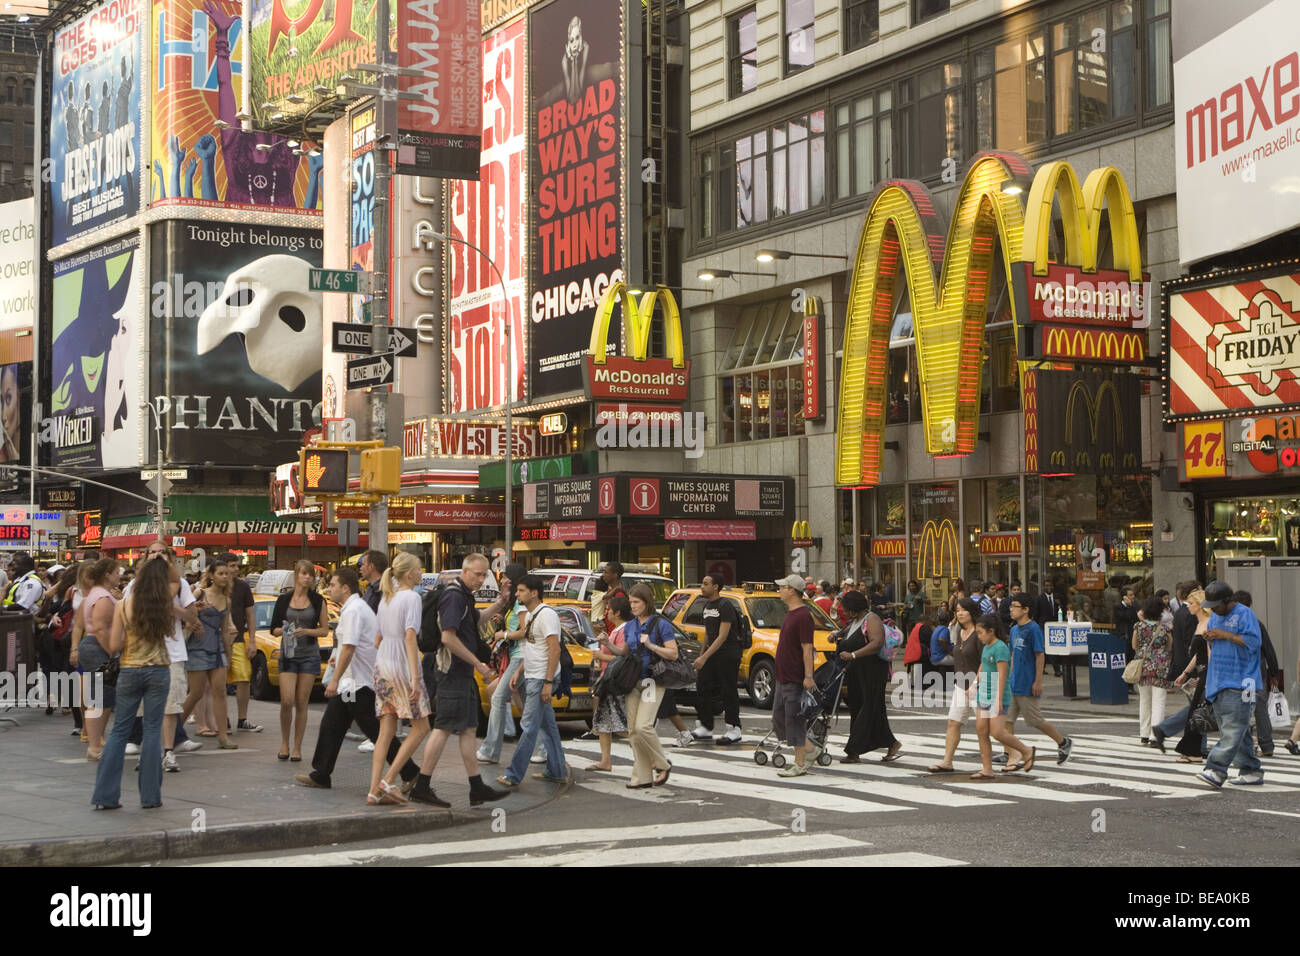 The Times Square area of New York City is crowded with tourists day and night. Stock Photo